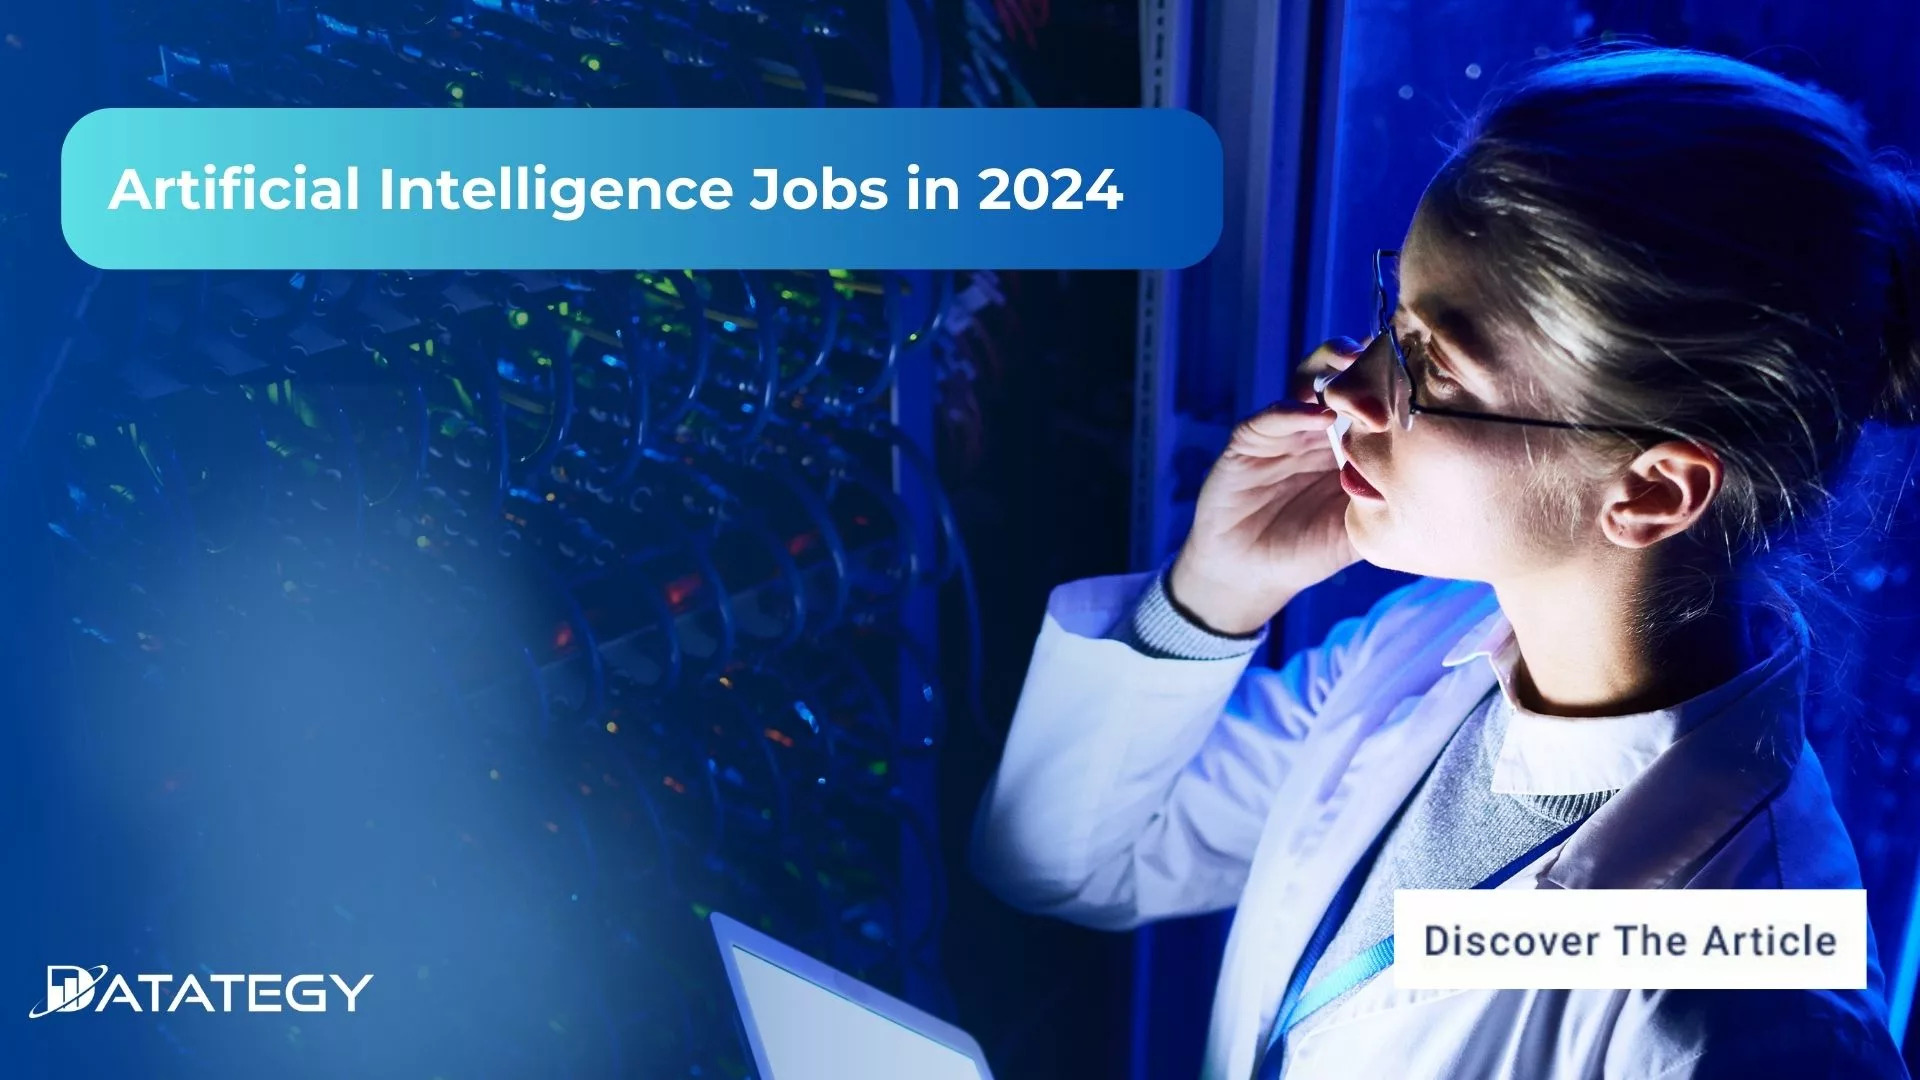 Artificial Intelligence Jobs in 2024